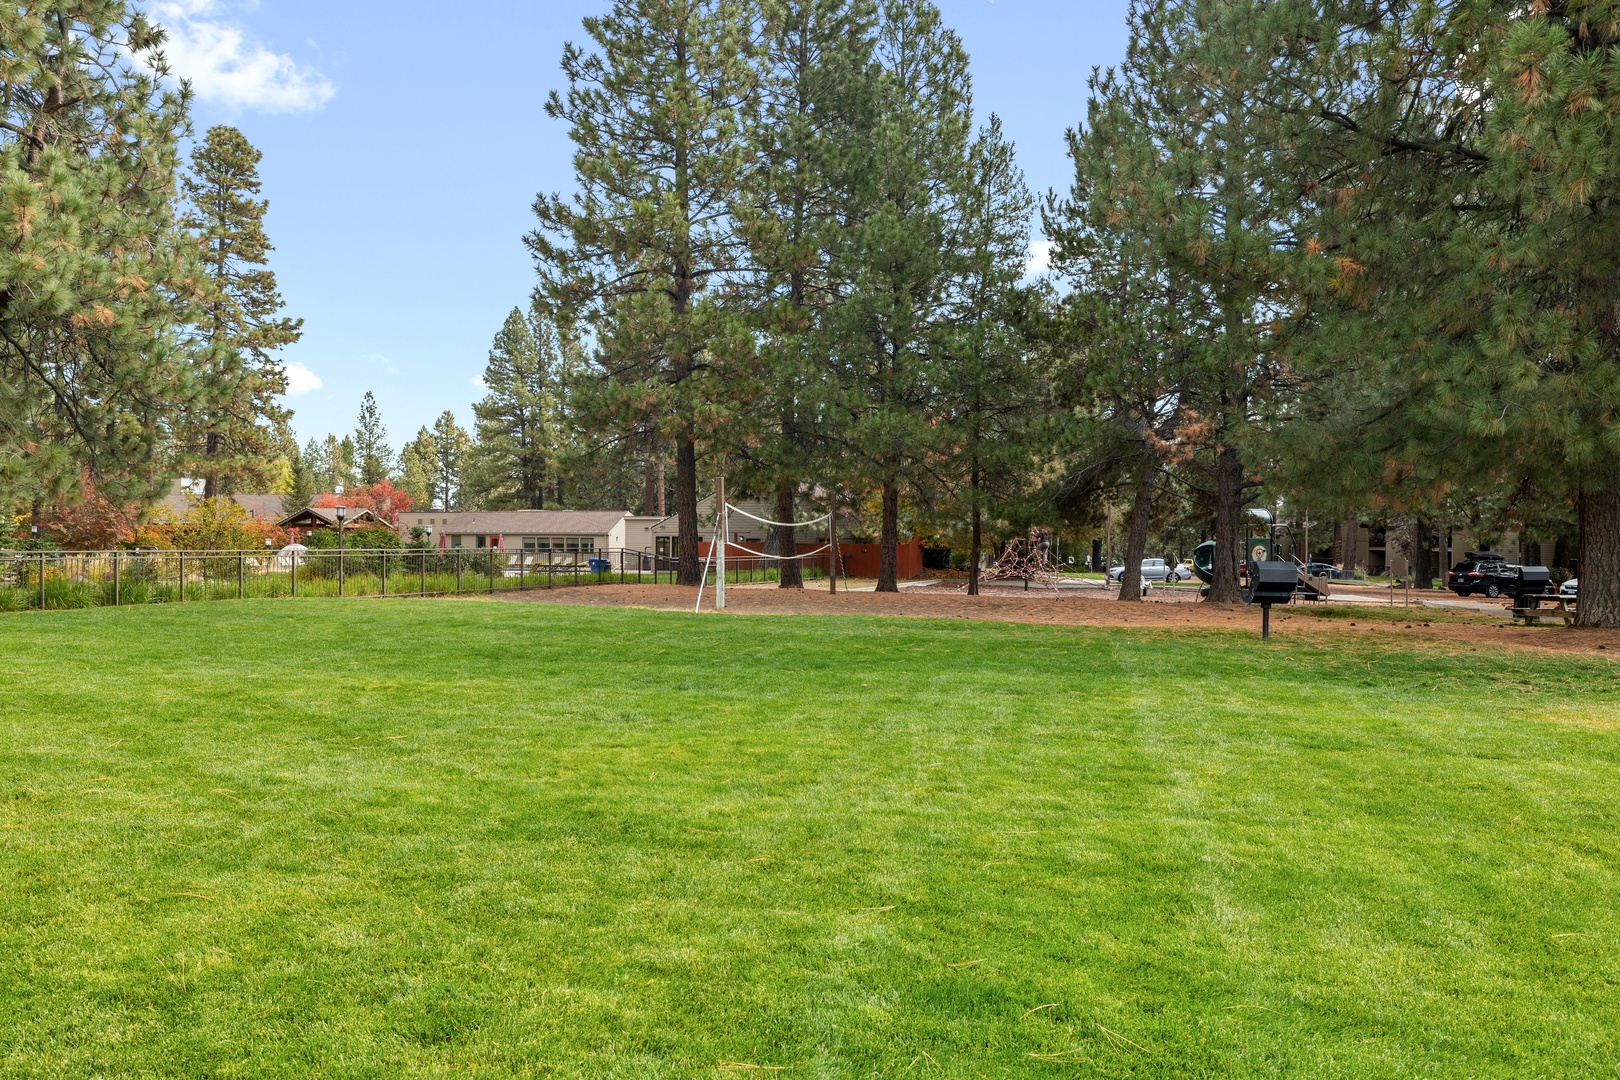 This exceptional community offers fabulous amenities for the whole family